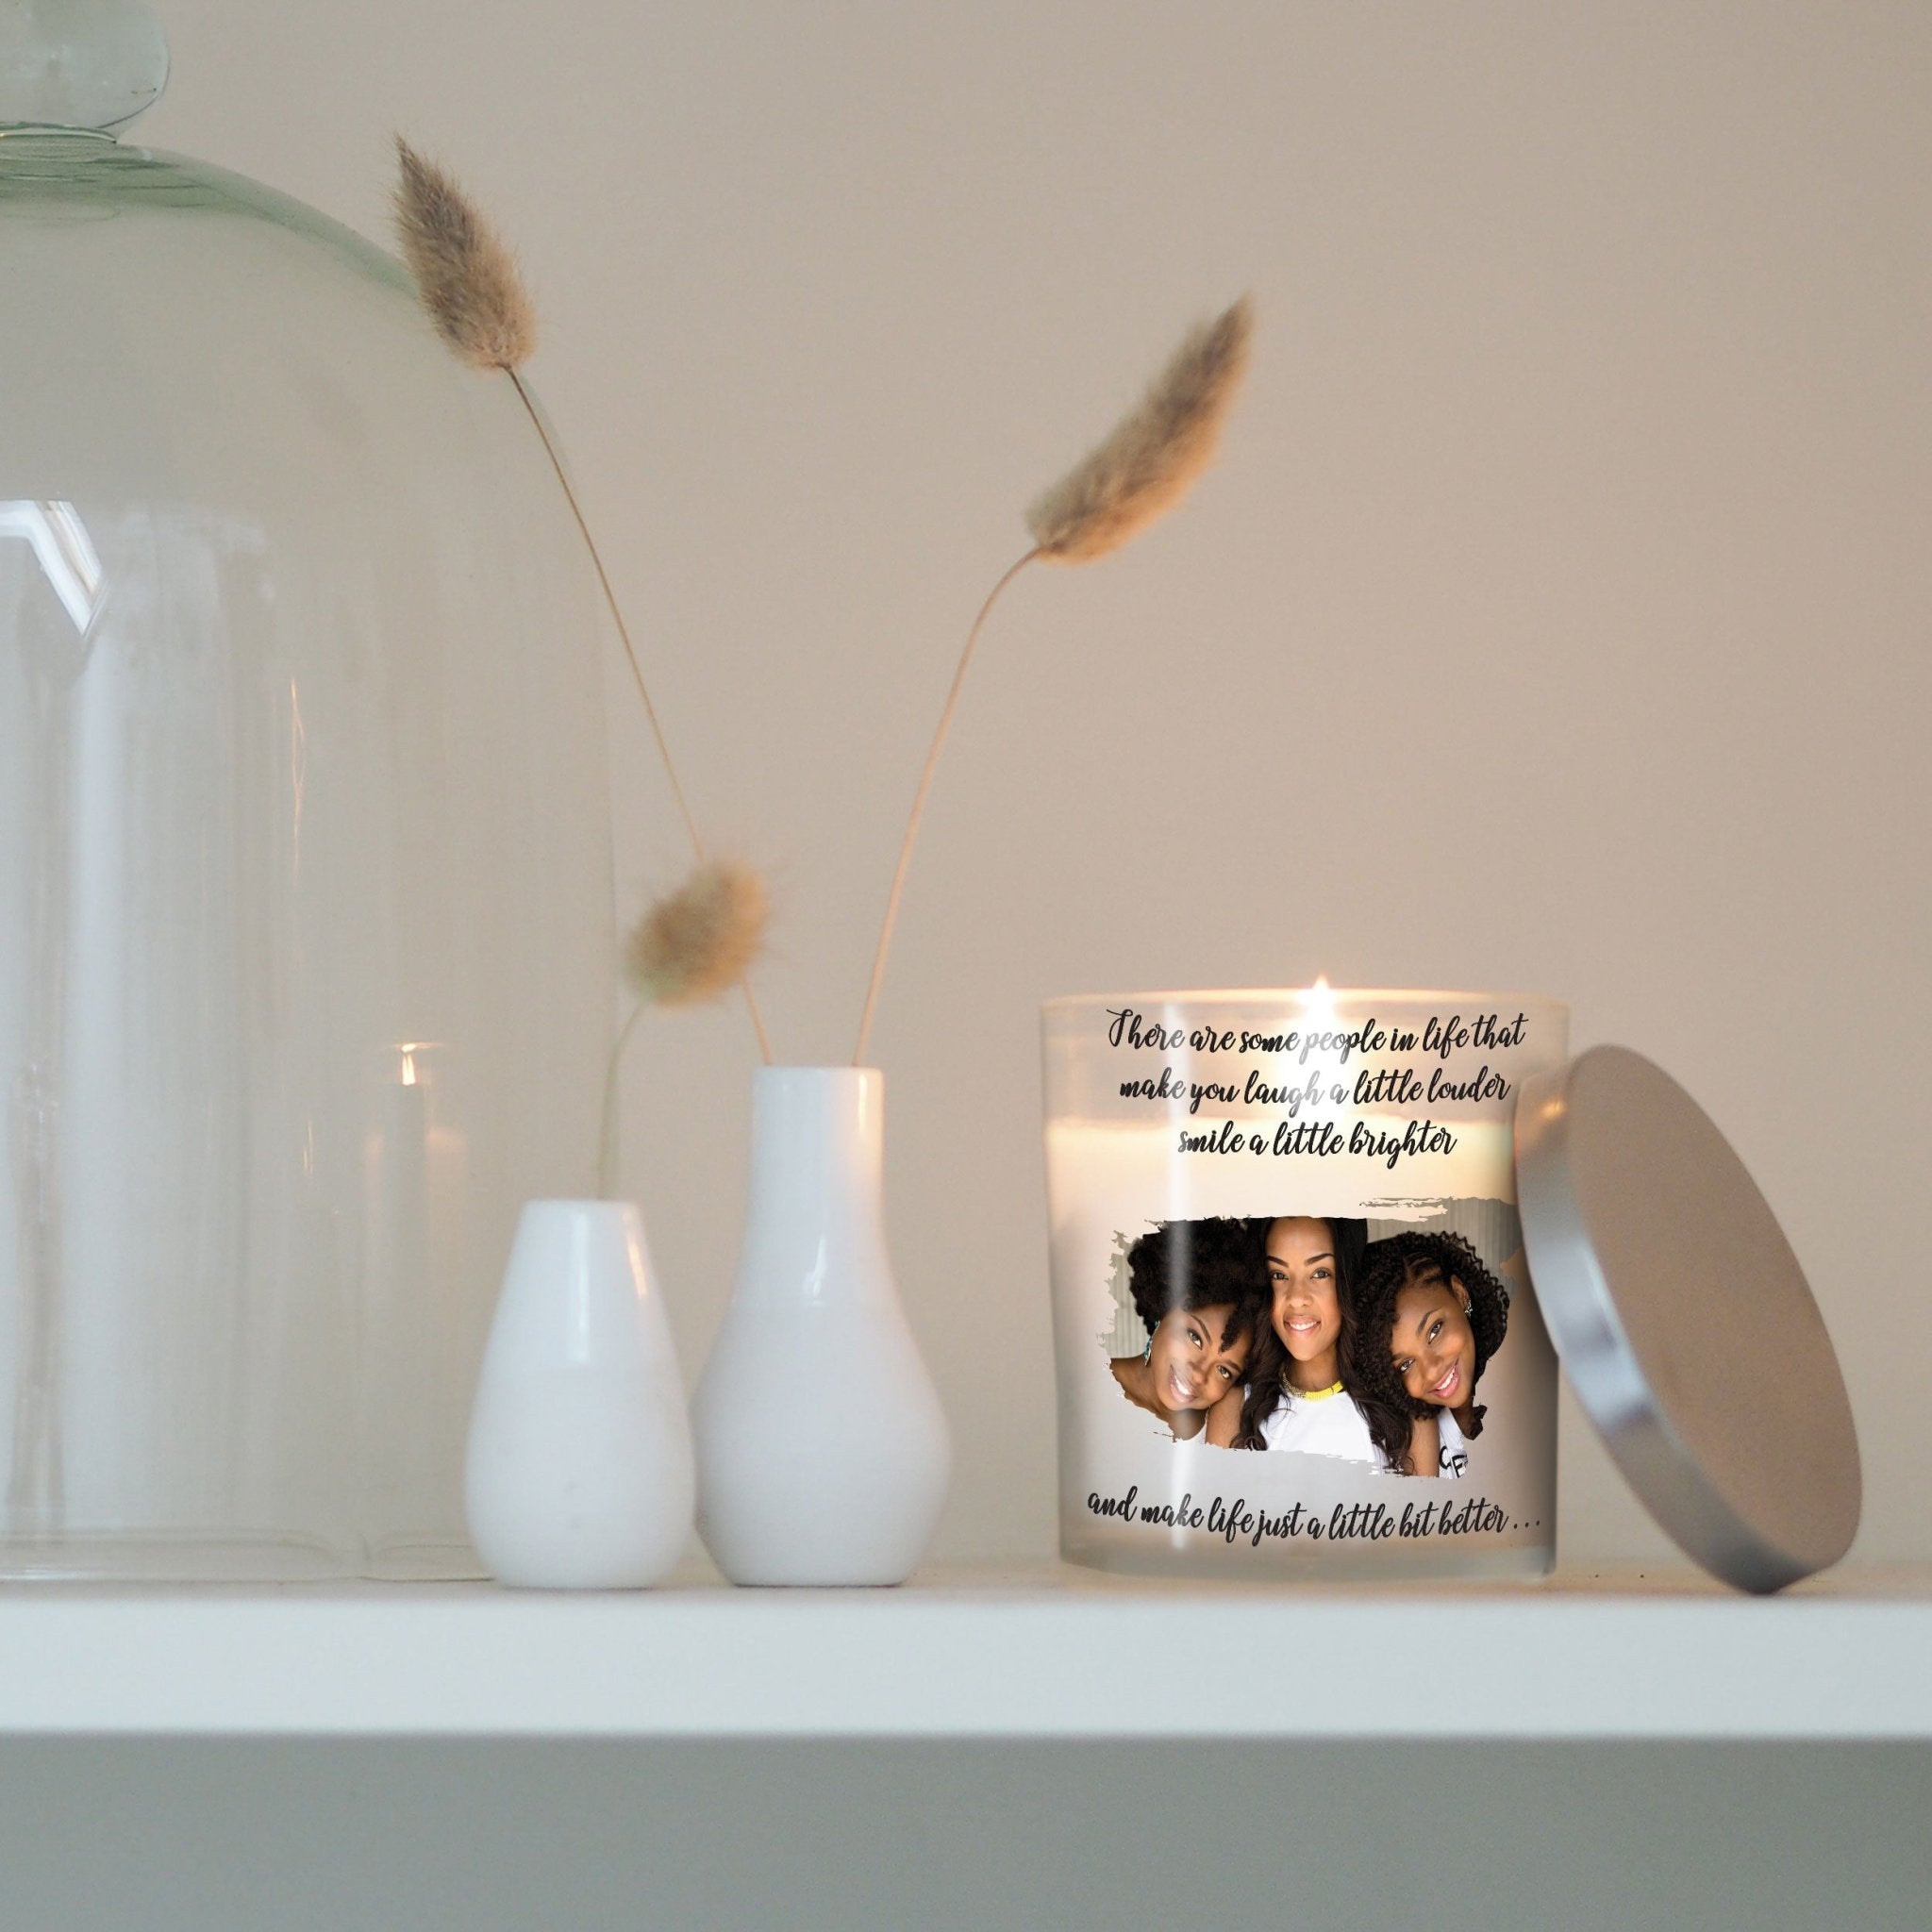 Soul Sister Gift Custom Photo Candle Holder | Unbiological Sis / Sister-In-Law Present Ideas | Personalized Votive Glass with Picture Decor Candleholder - Unique Prints